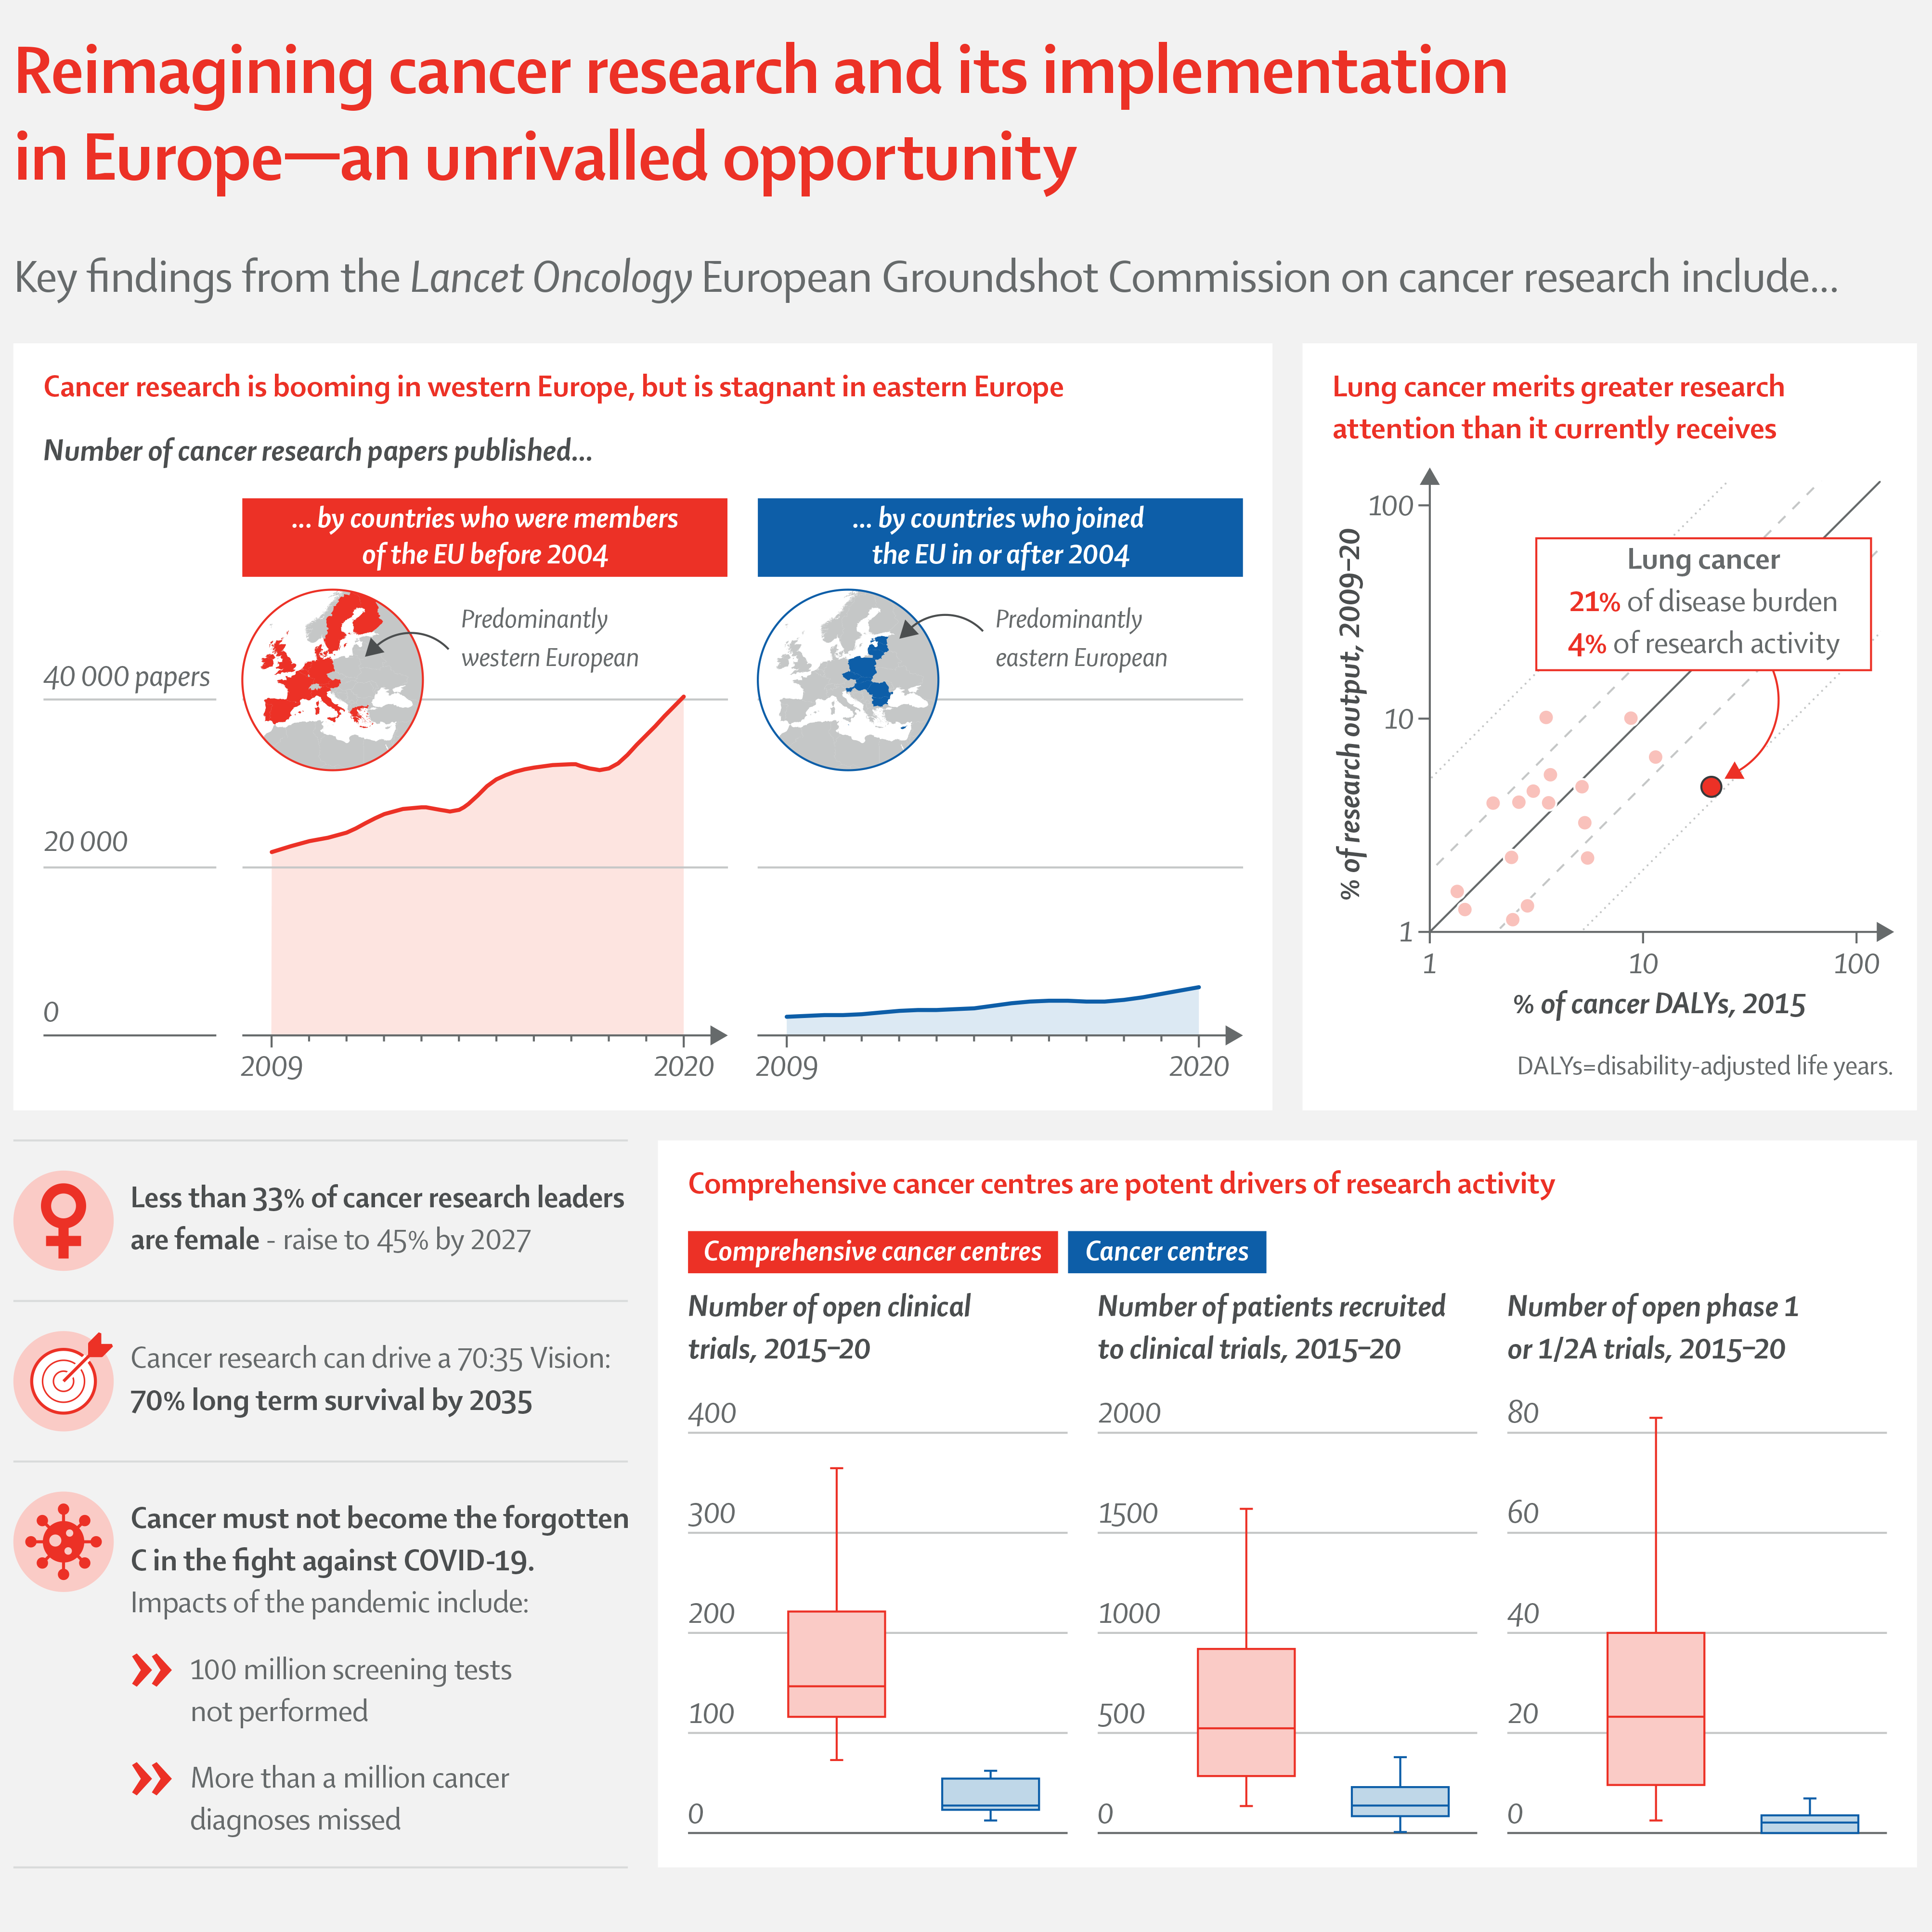 Expert commission report pinpoints unprecedented challenges faced by cancer research in Europe